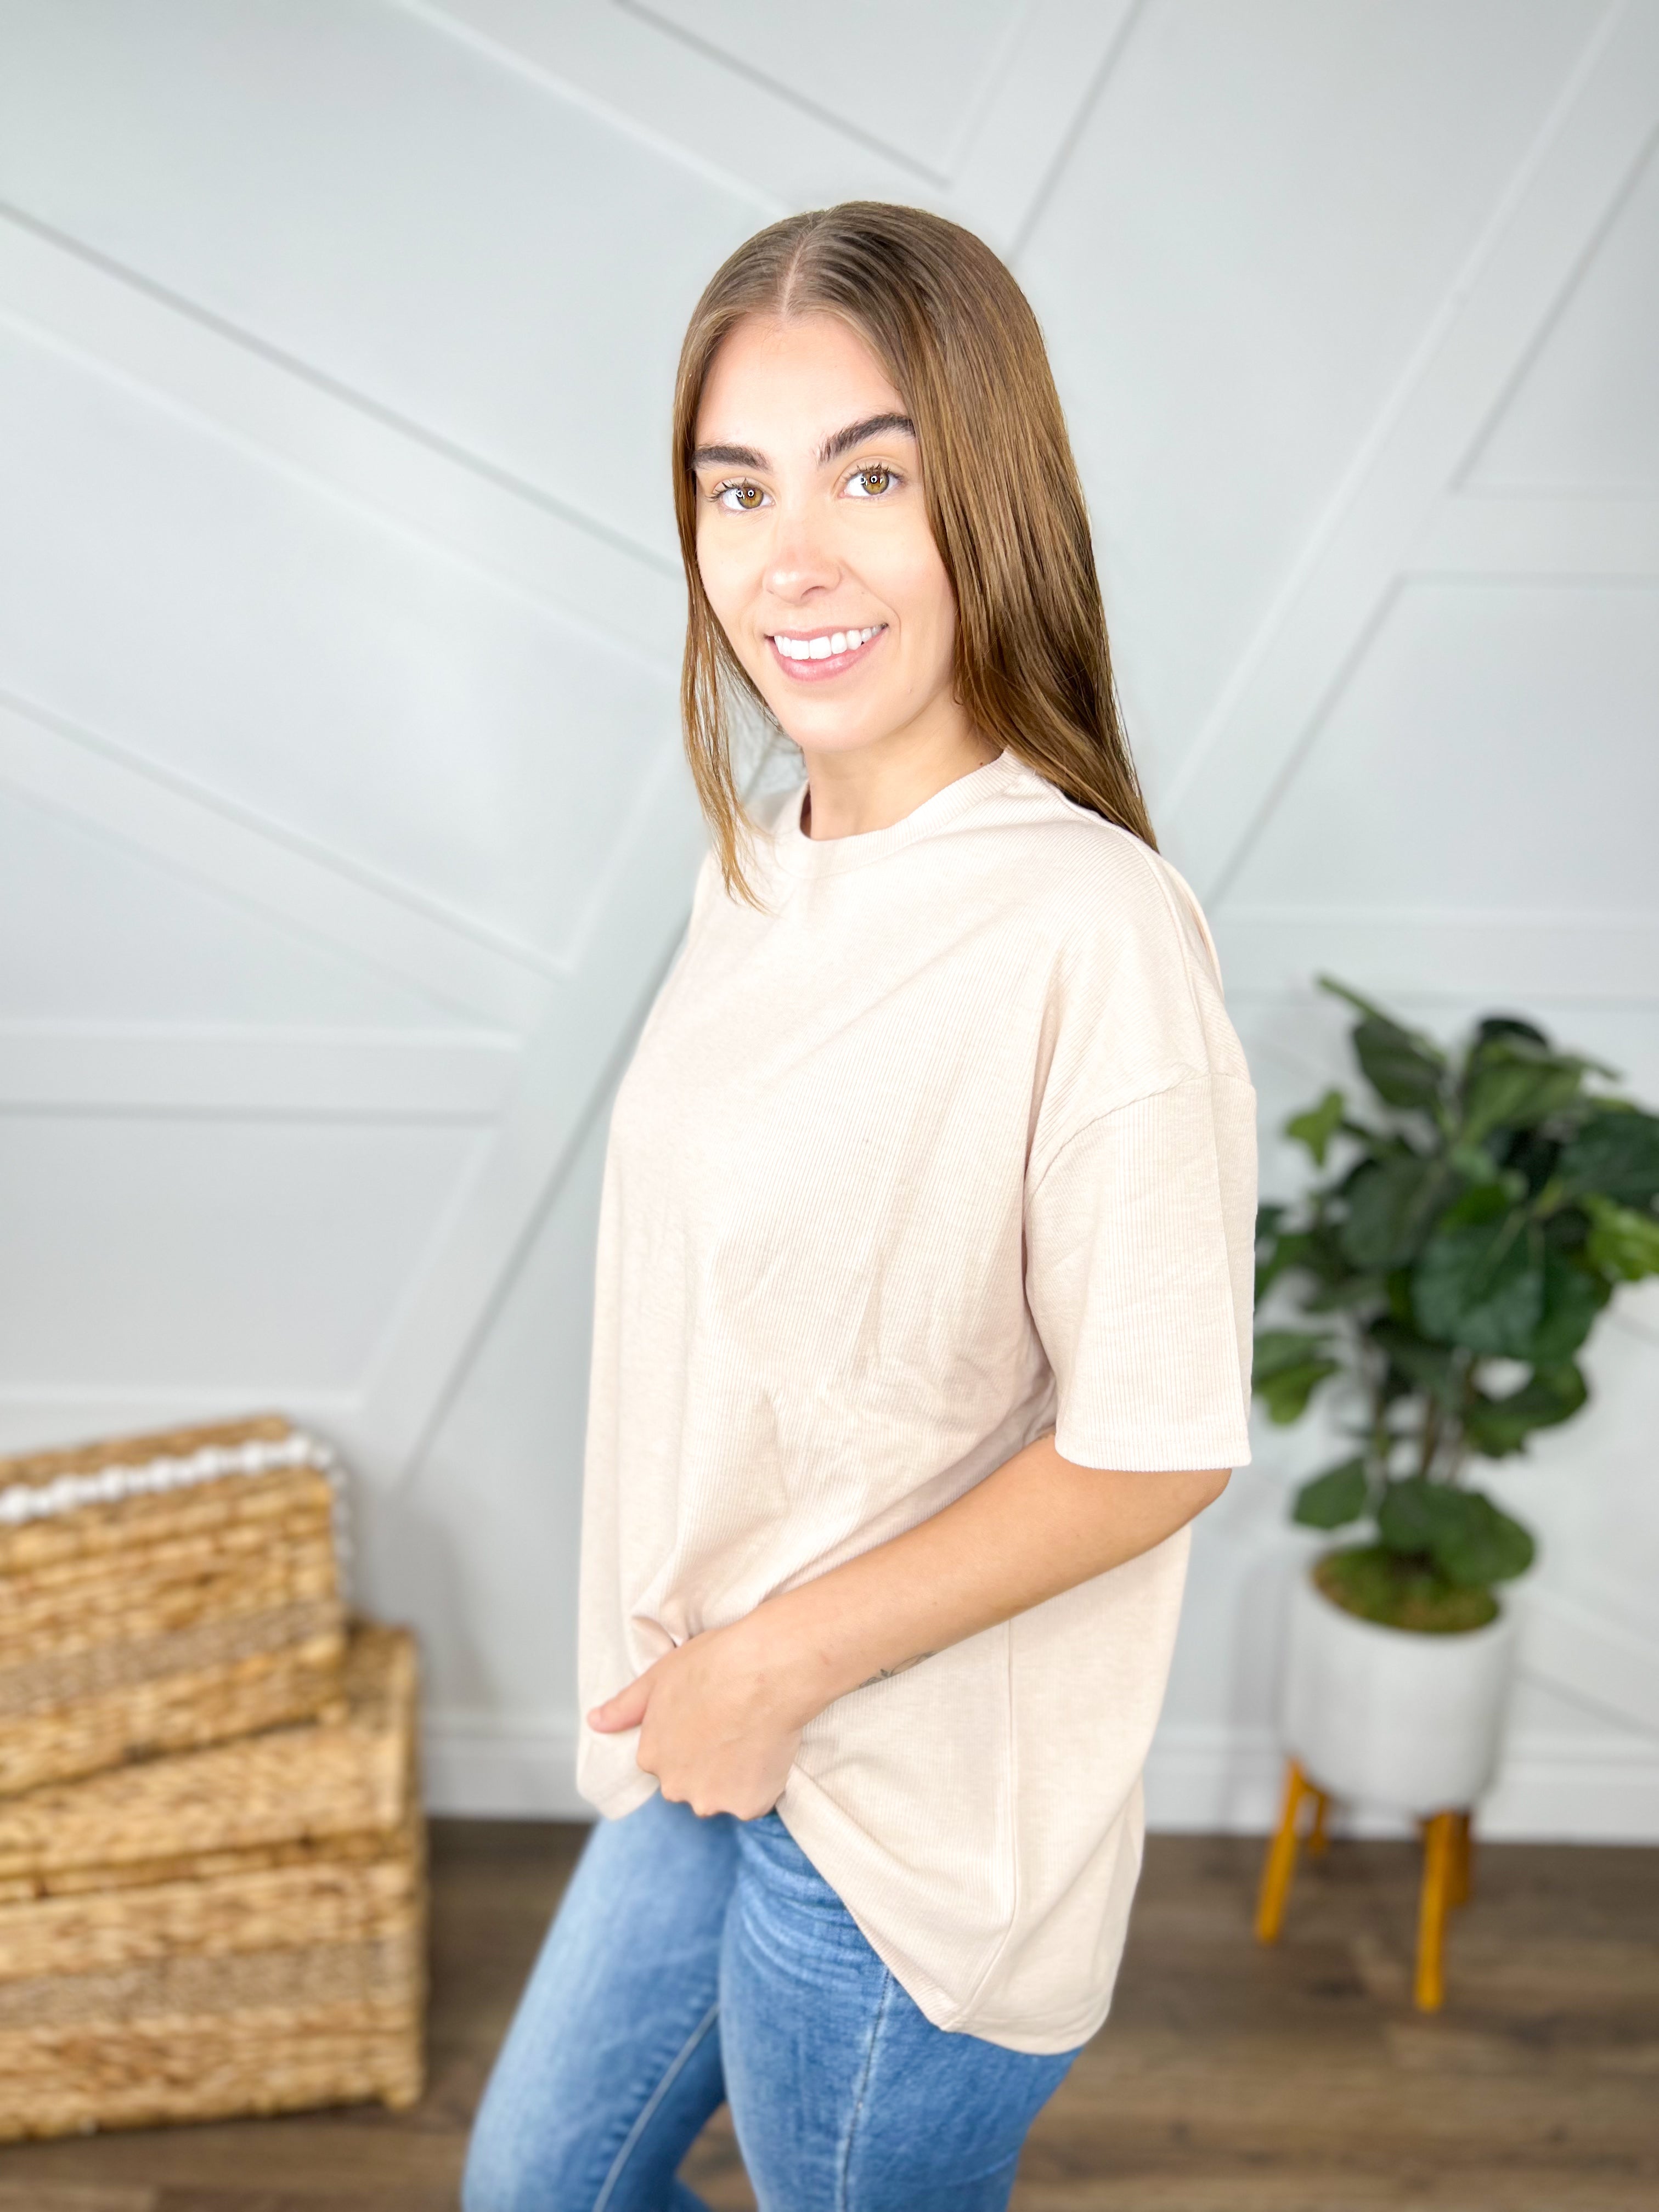 Flying High Top-110 Short Sleeve Top-White Birch-Heathered Boho Boutique, Women's Fashion and Accessories in Palmetto, FL